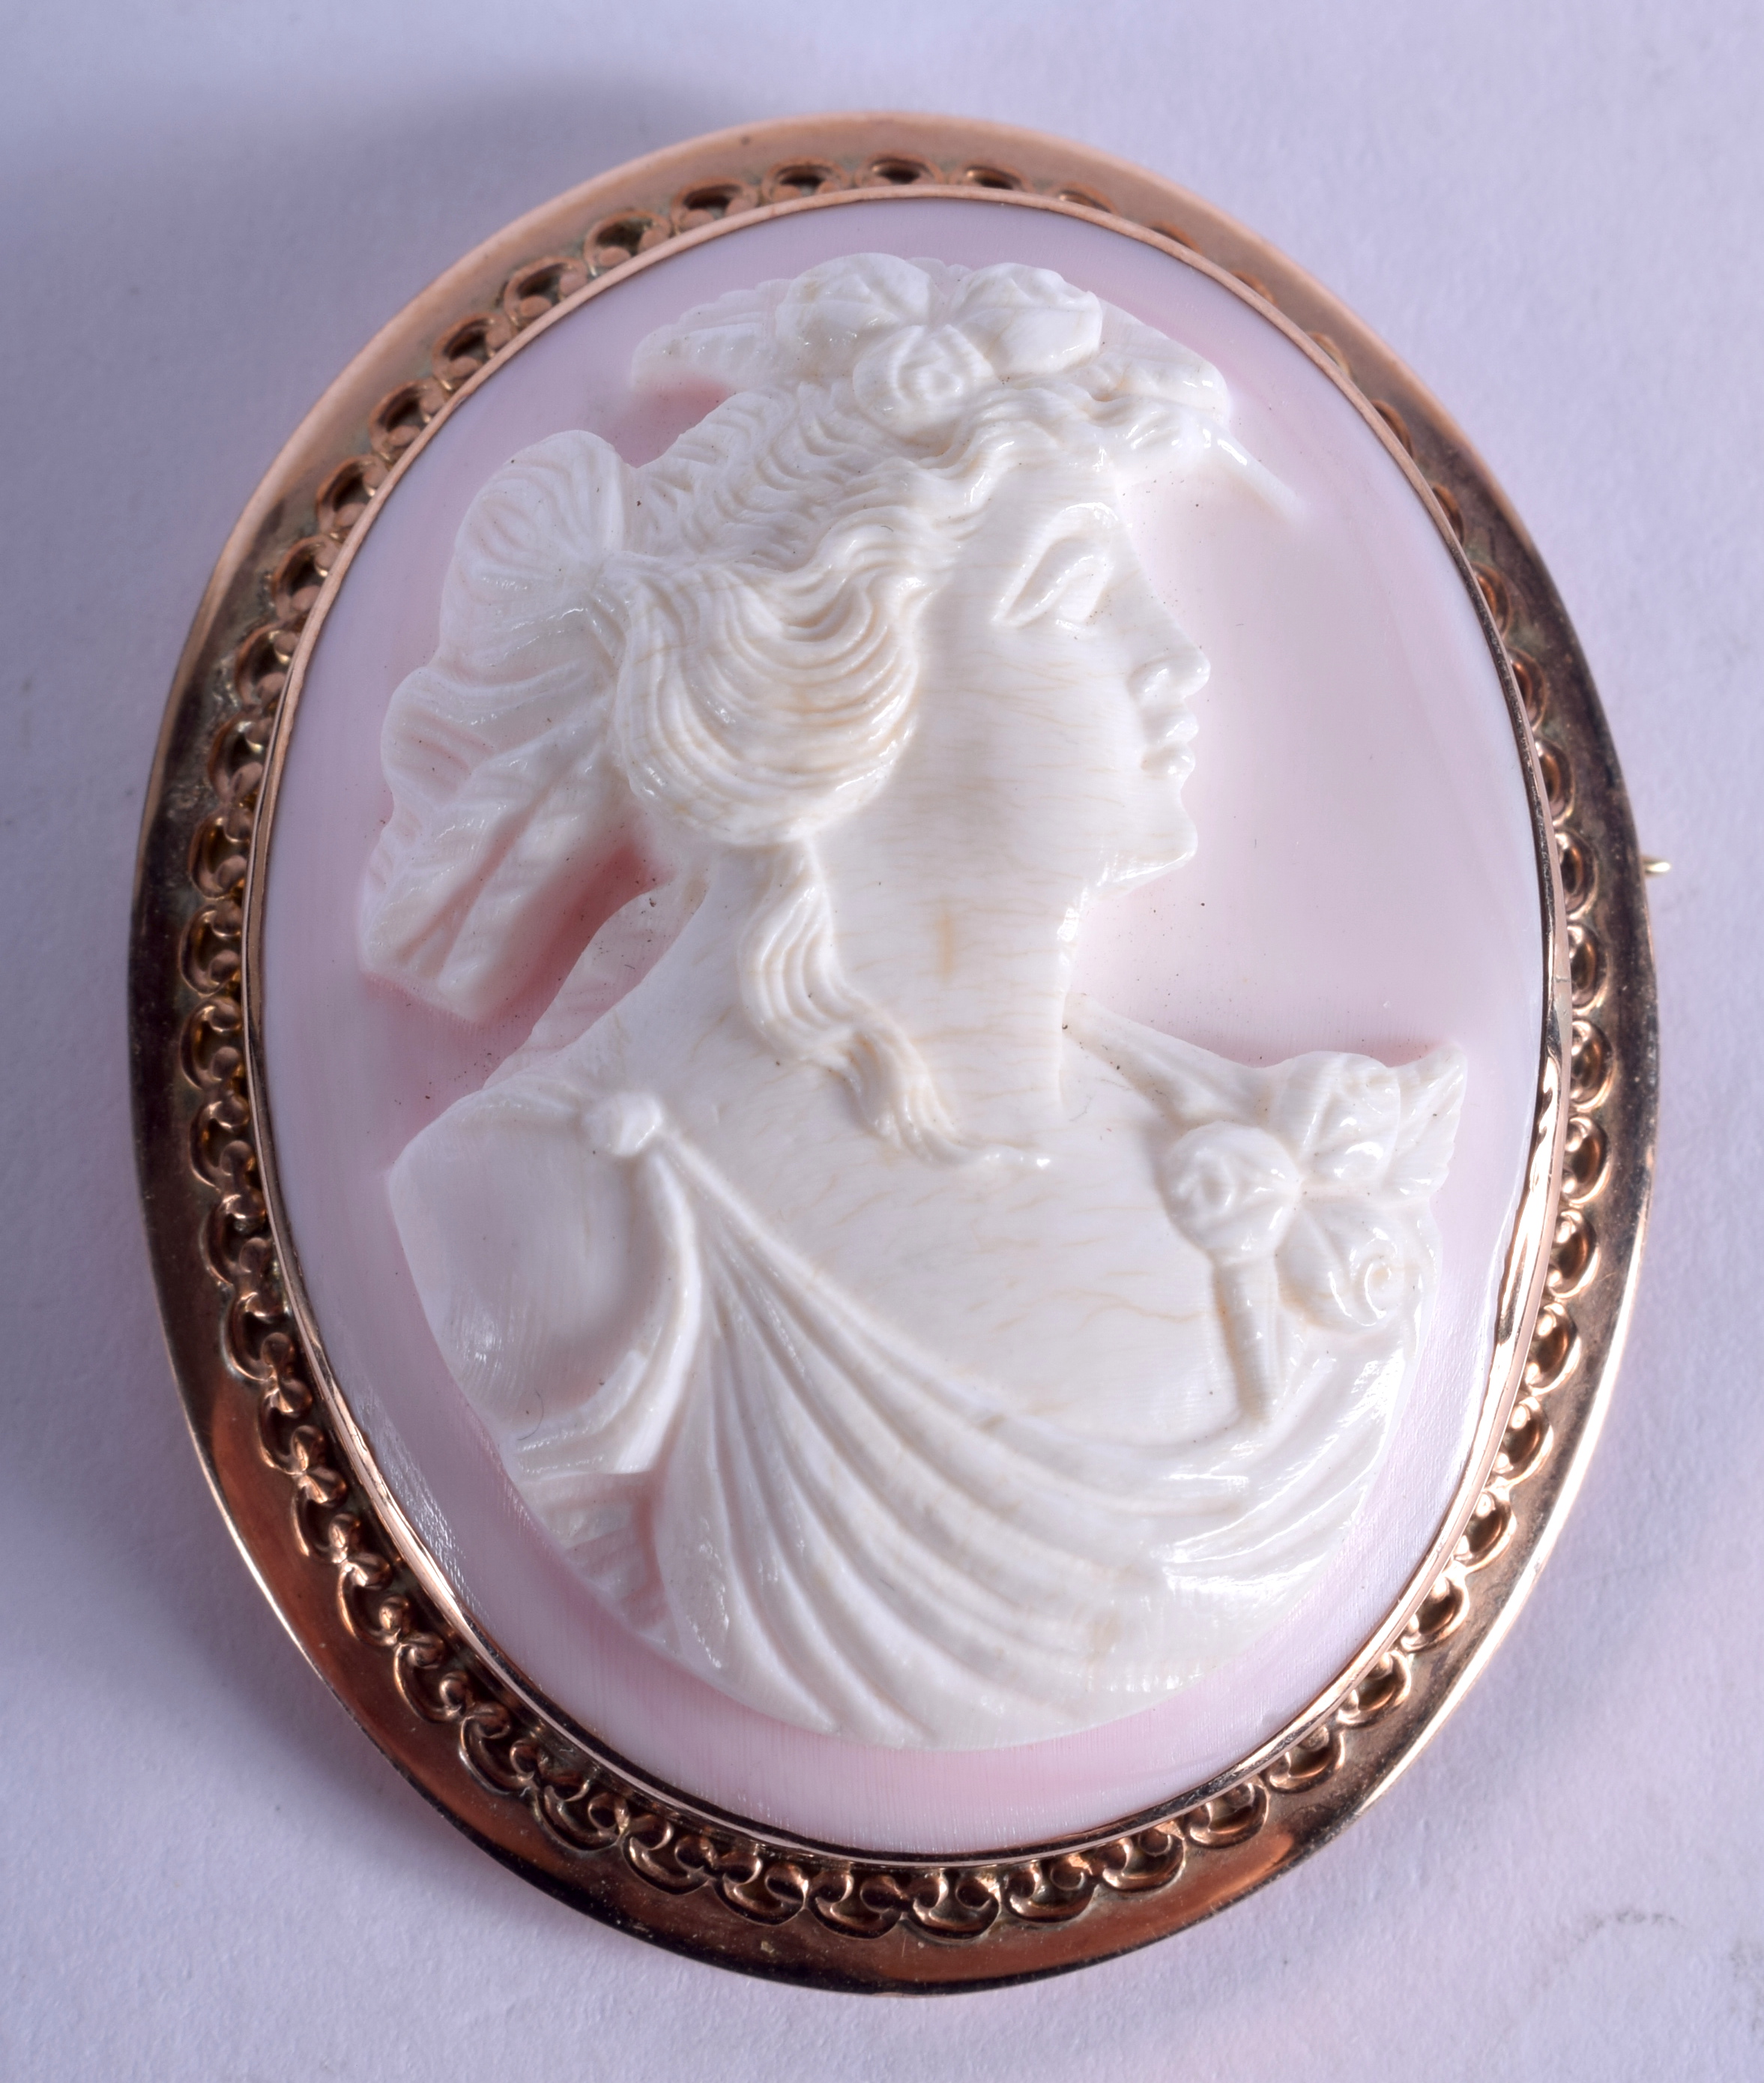 AN ANTIQUE 9CT GOLD CAMEO BROOCH. 16.7 grams. 4 cm x 4.5 cm.